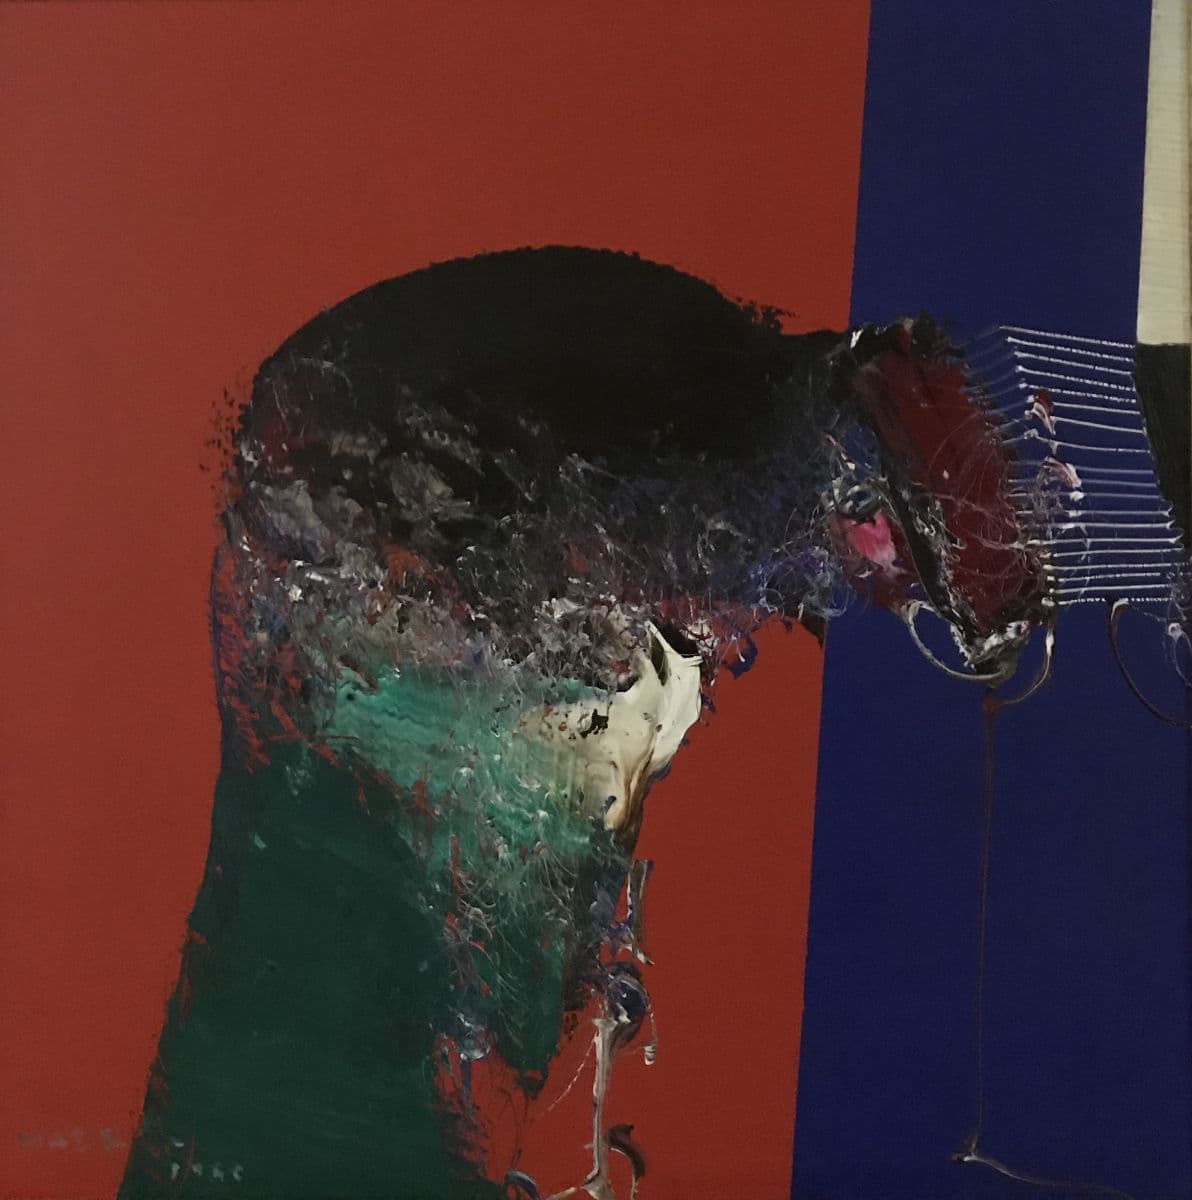 Fig. 2 – Manabu Mabe, OST, 51 x 51 cm, 1980, MB03, Work with certificate, Brazil Gallery. Link to the work.